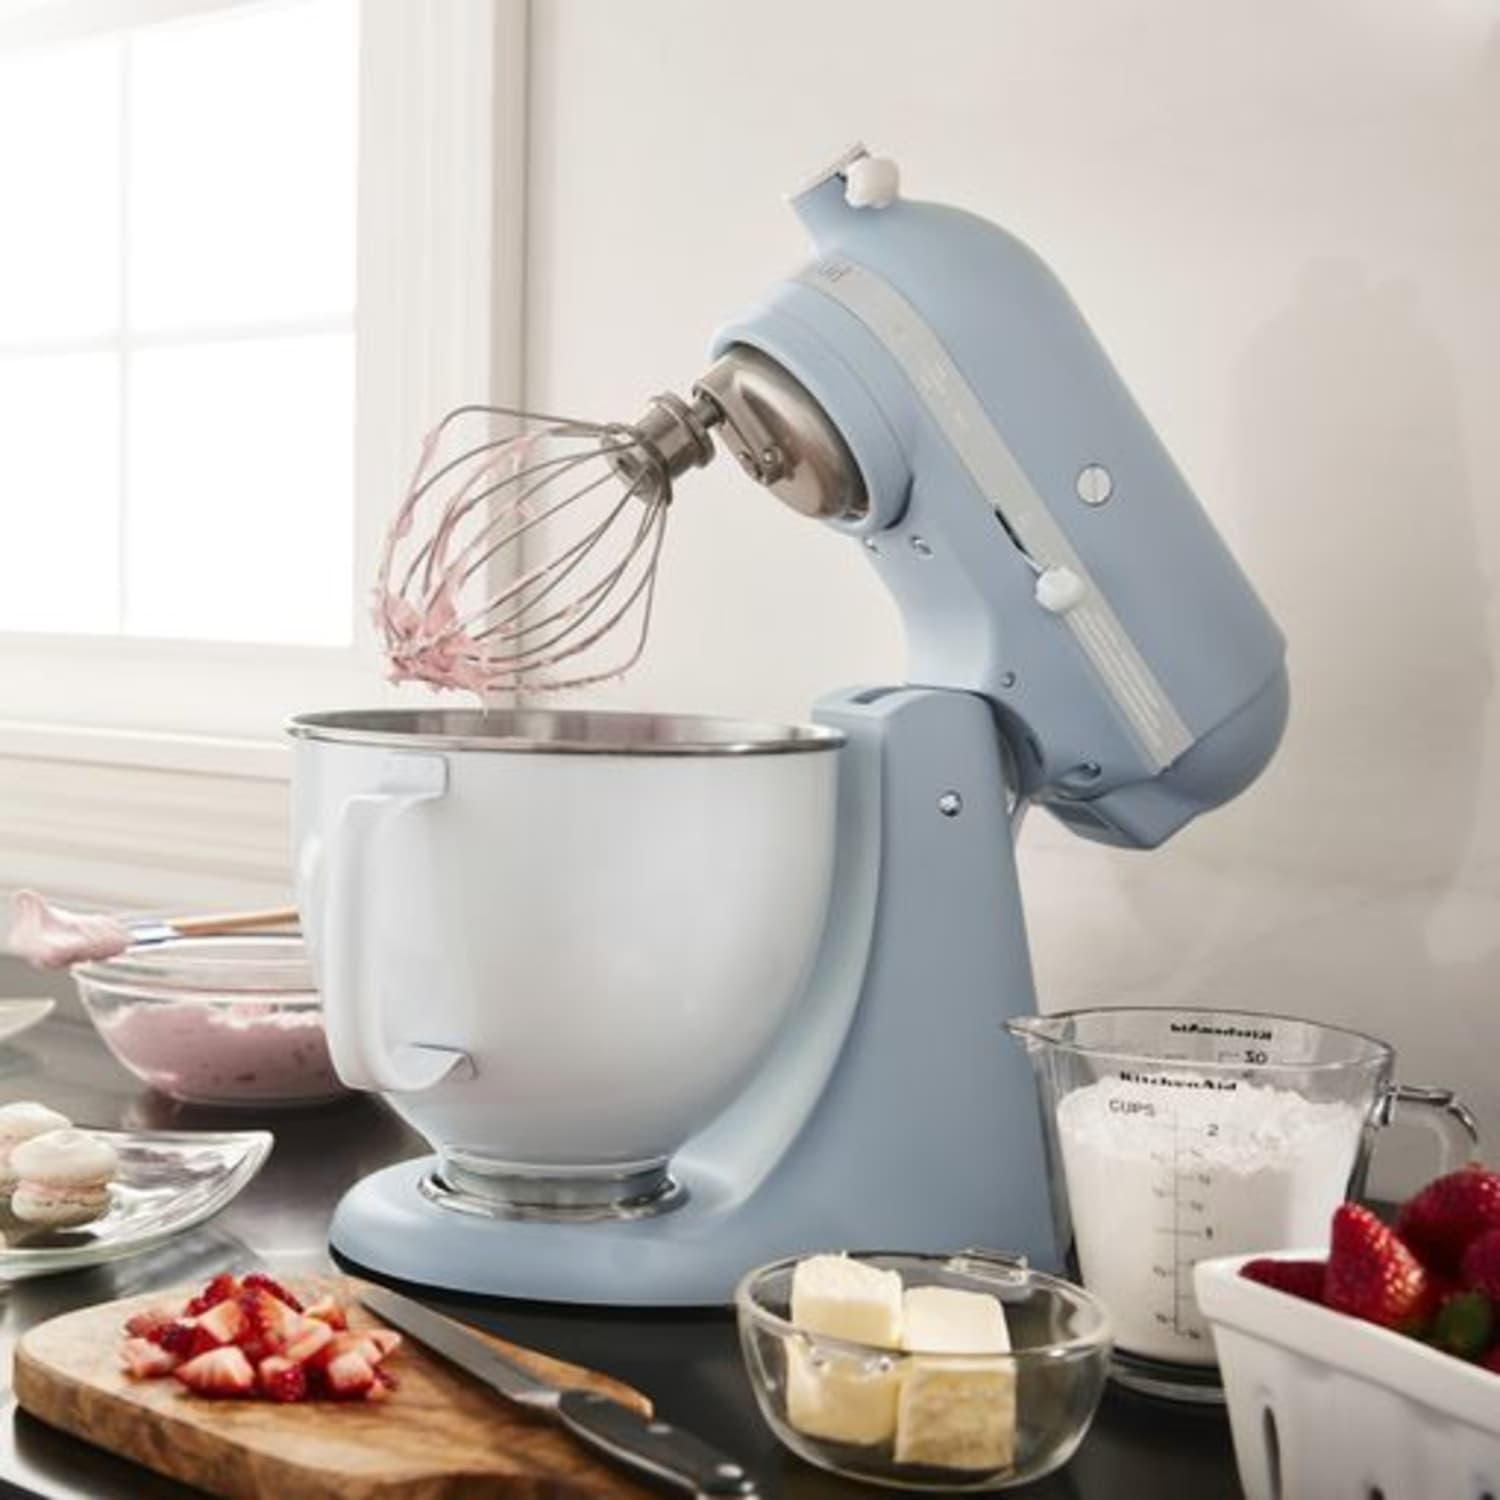 Jolly woordenboek Corrupt KitchenAid Released A Retro-Inspired Color For Their 100th Anniversary |  Apartment Therapy